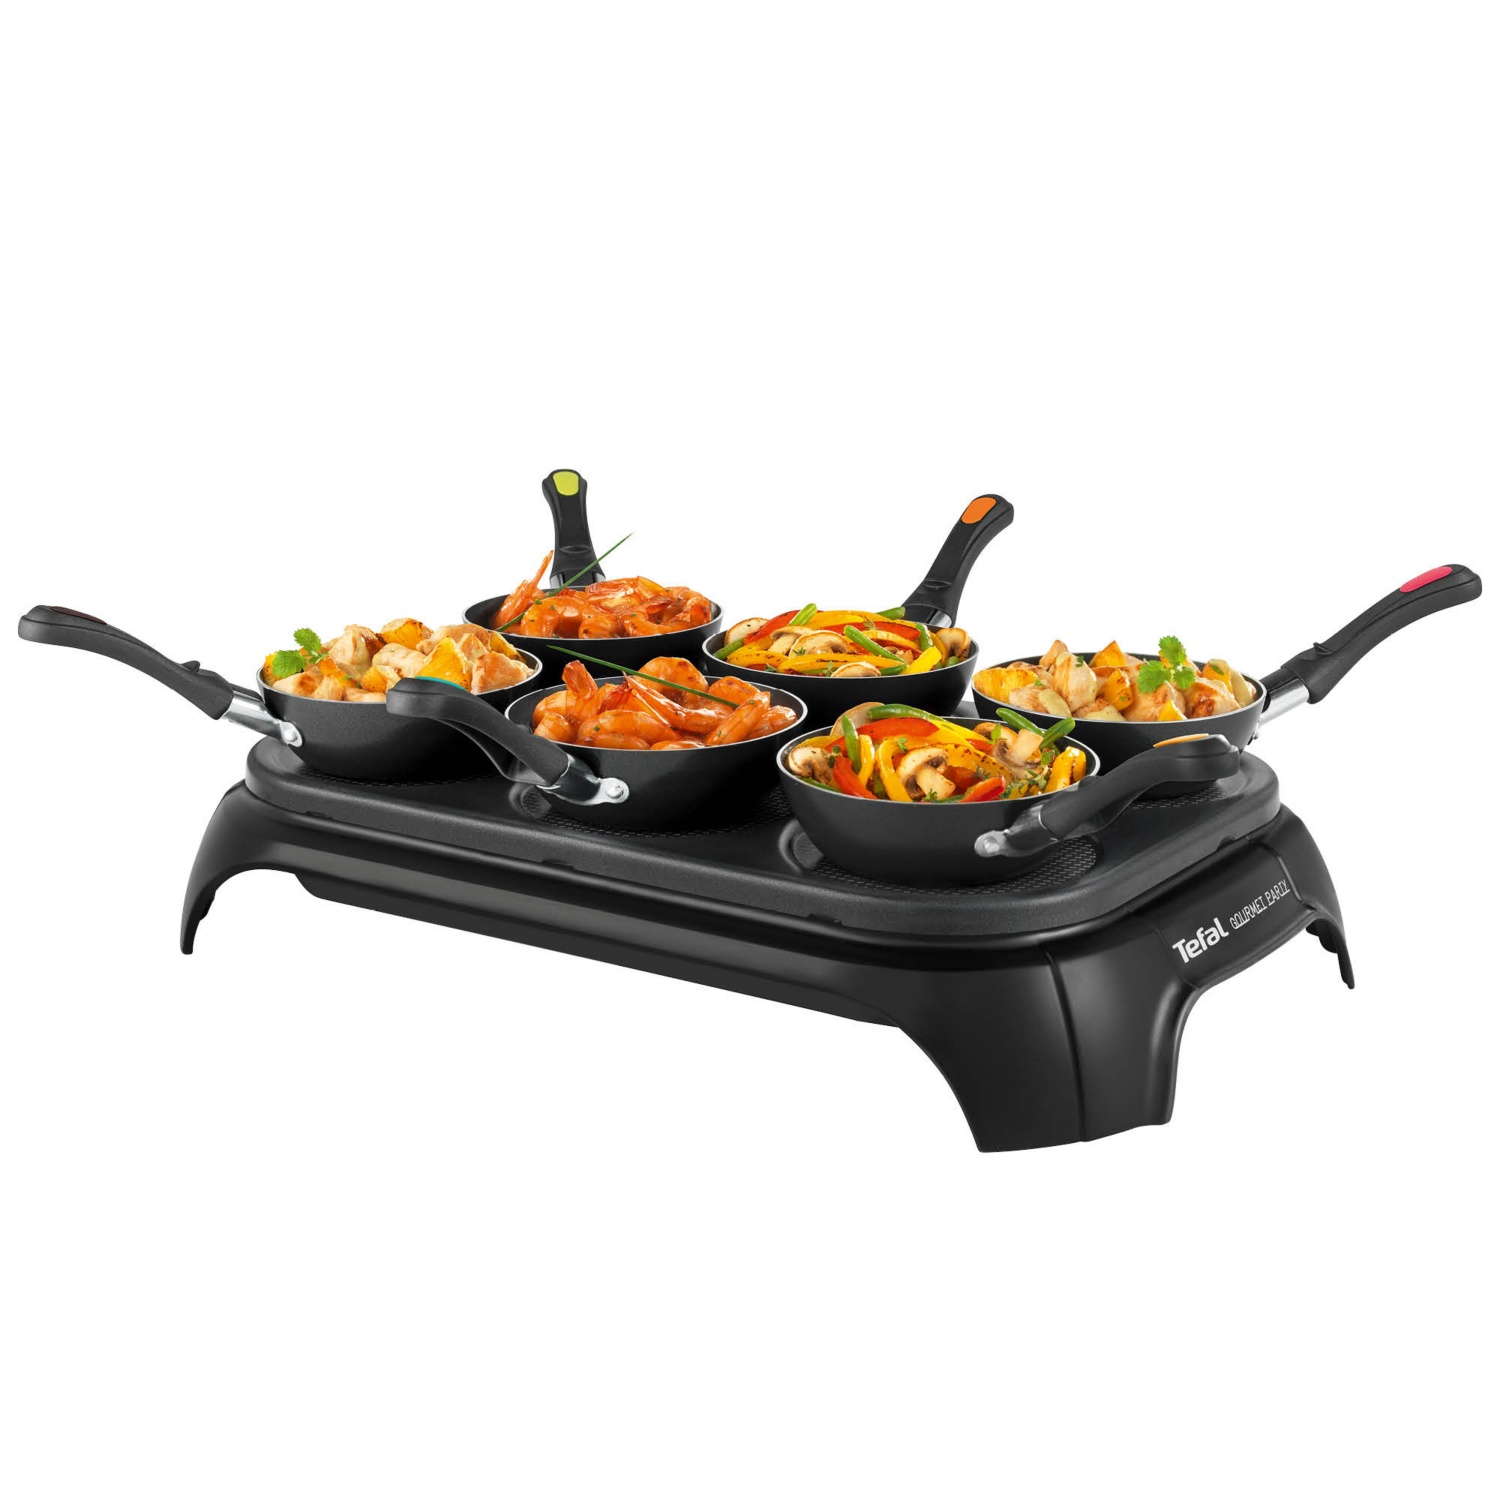 TEFAL Gourmet Party crepes e wok 2 in 1